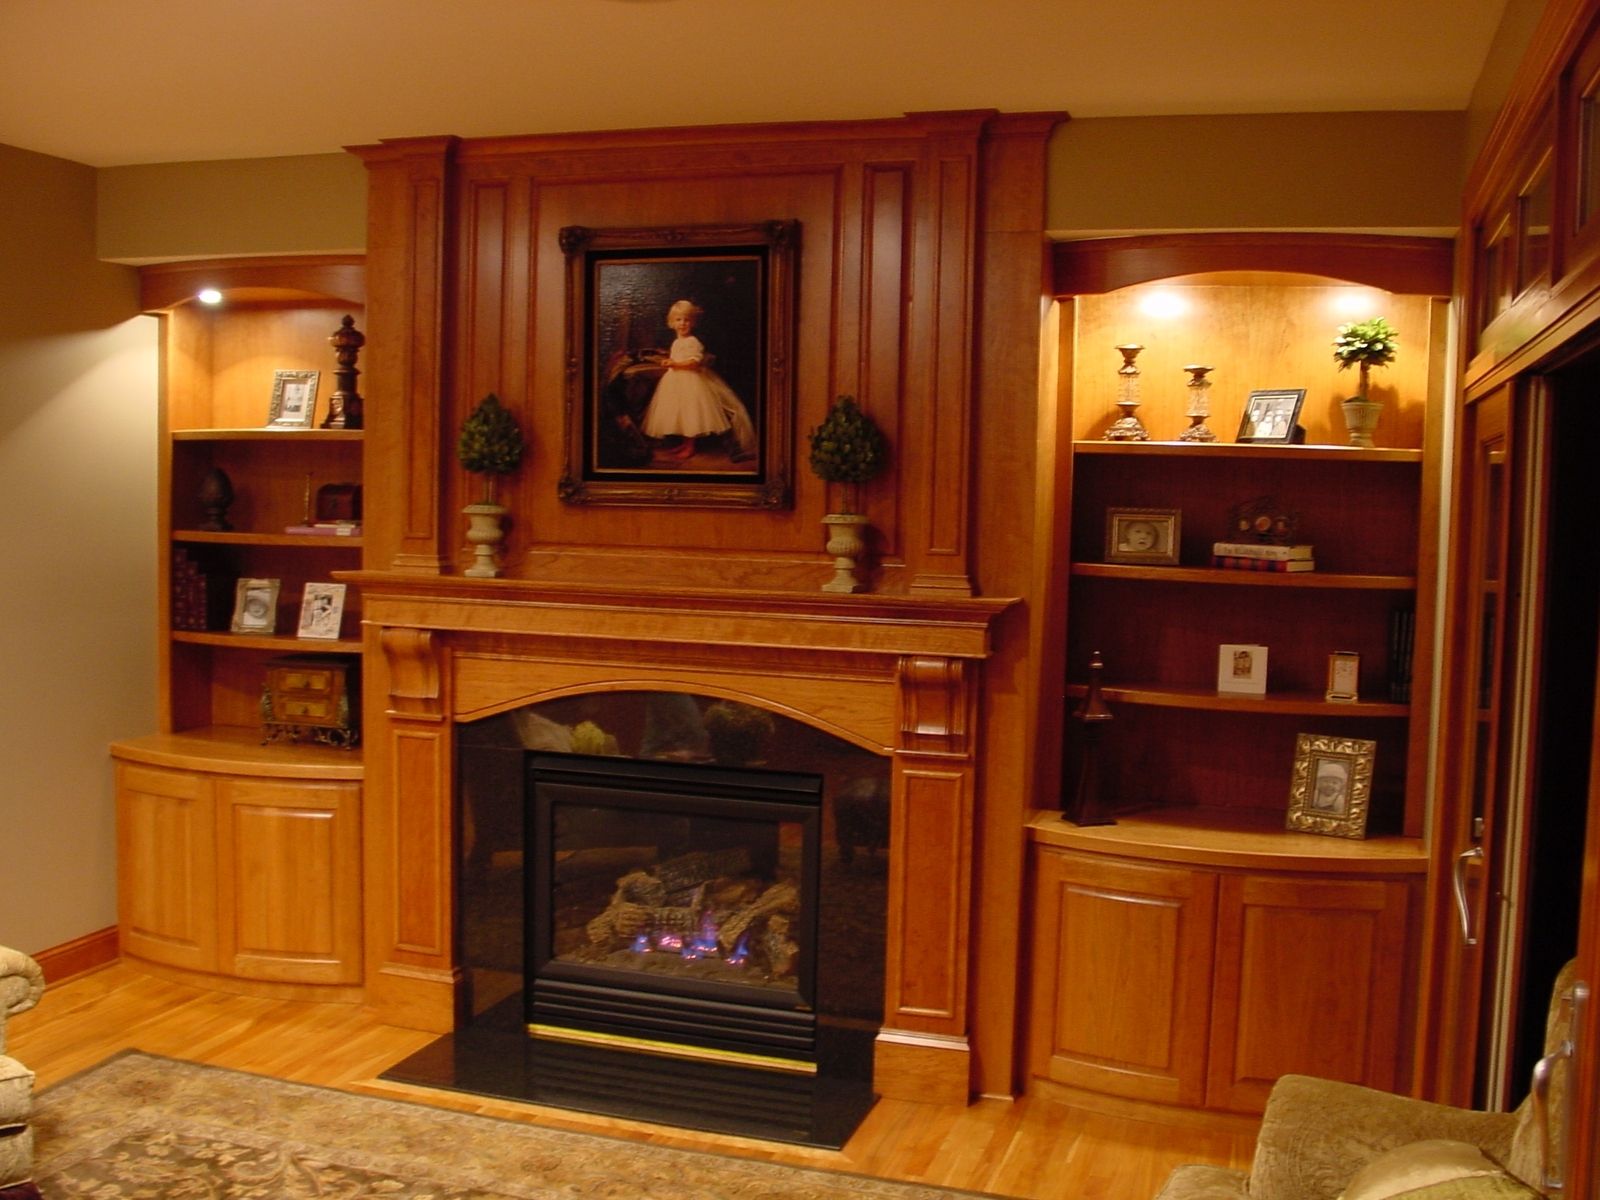 Hand Made Fireplace Mantel And Built In, Built In Shelving Units Around Fireplaces